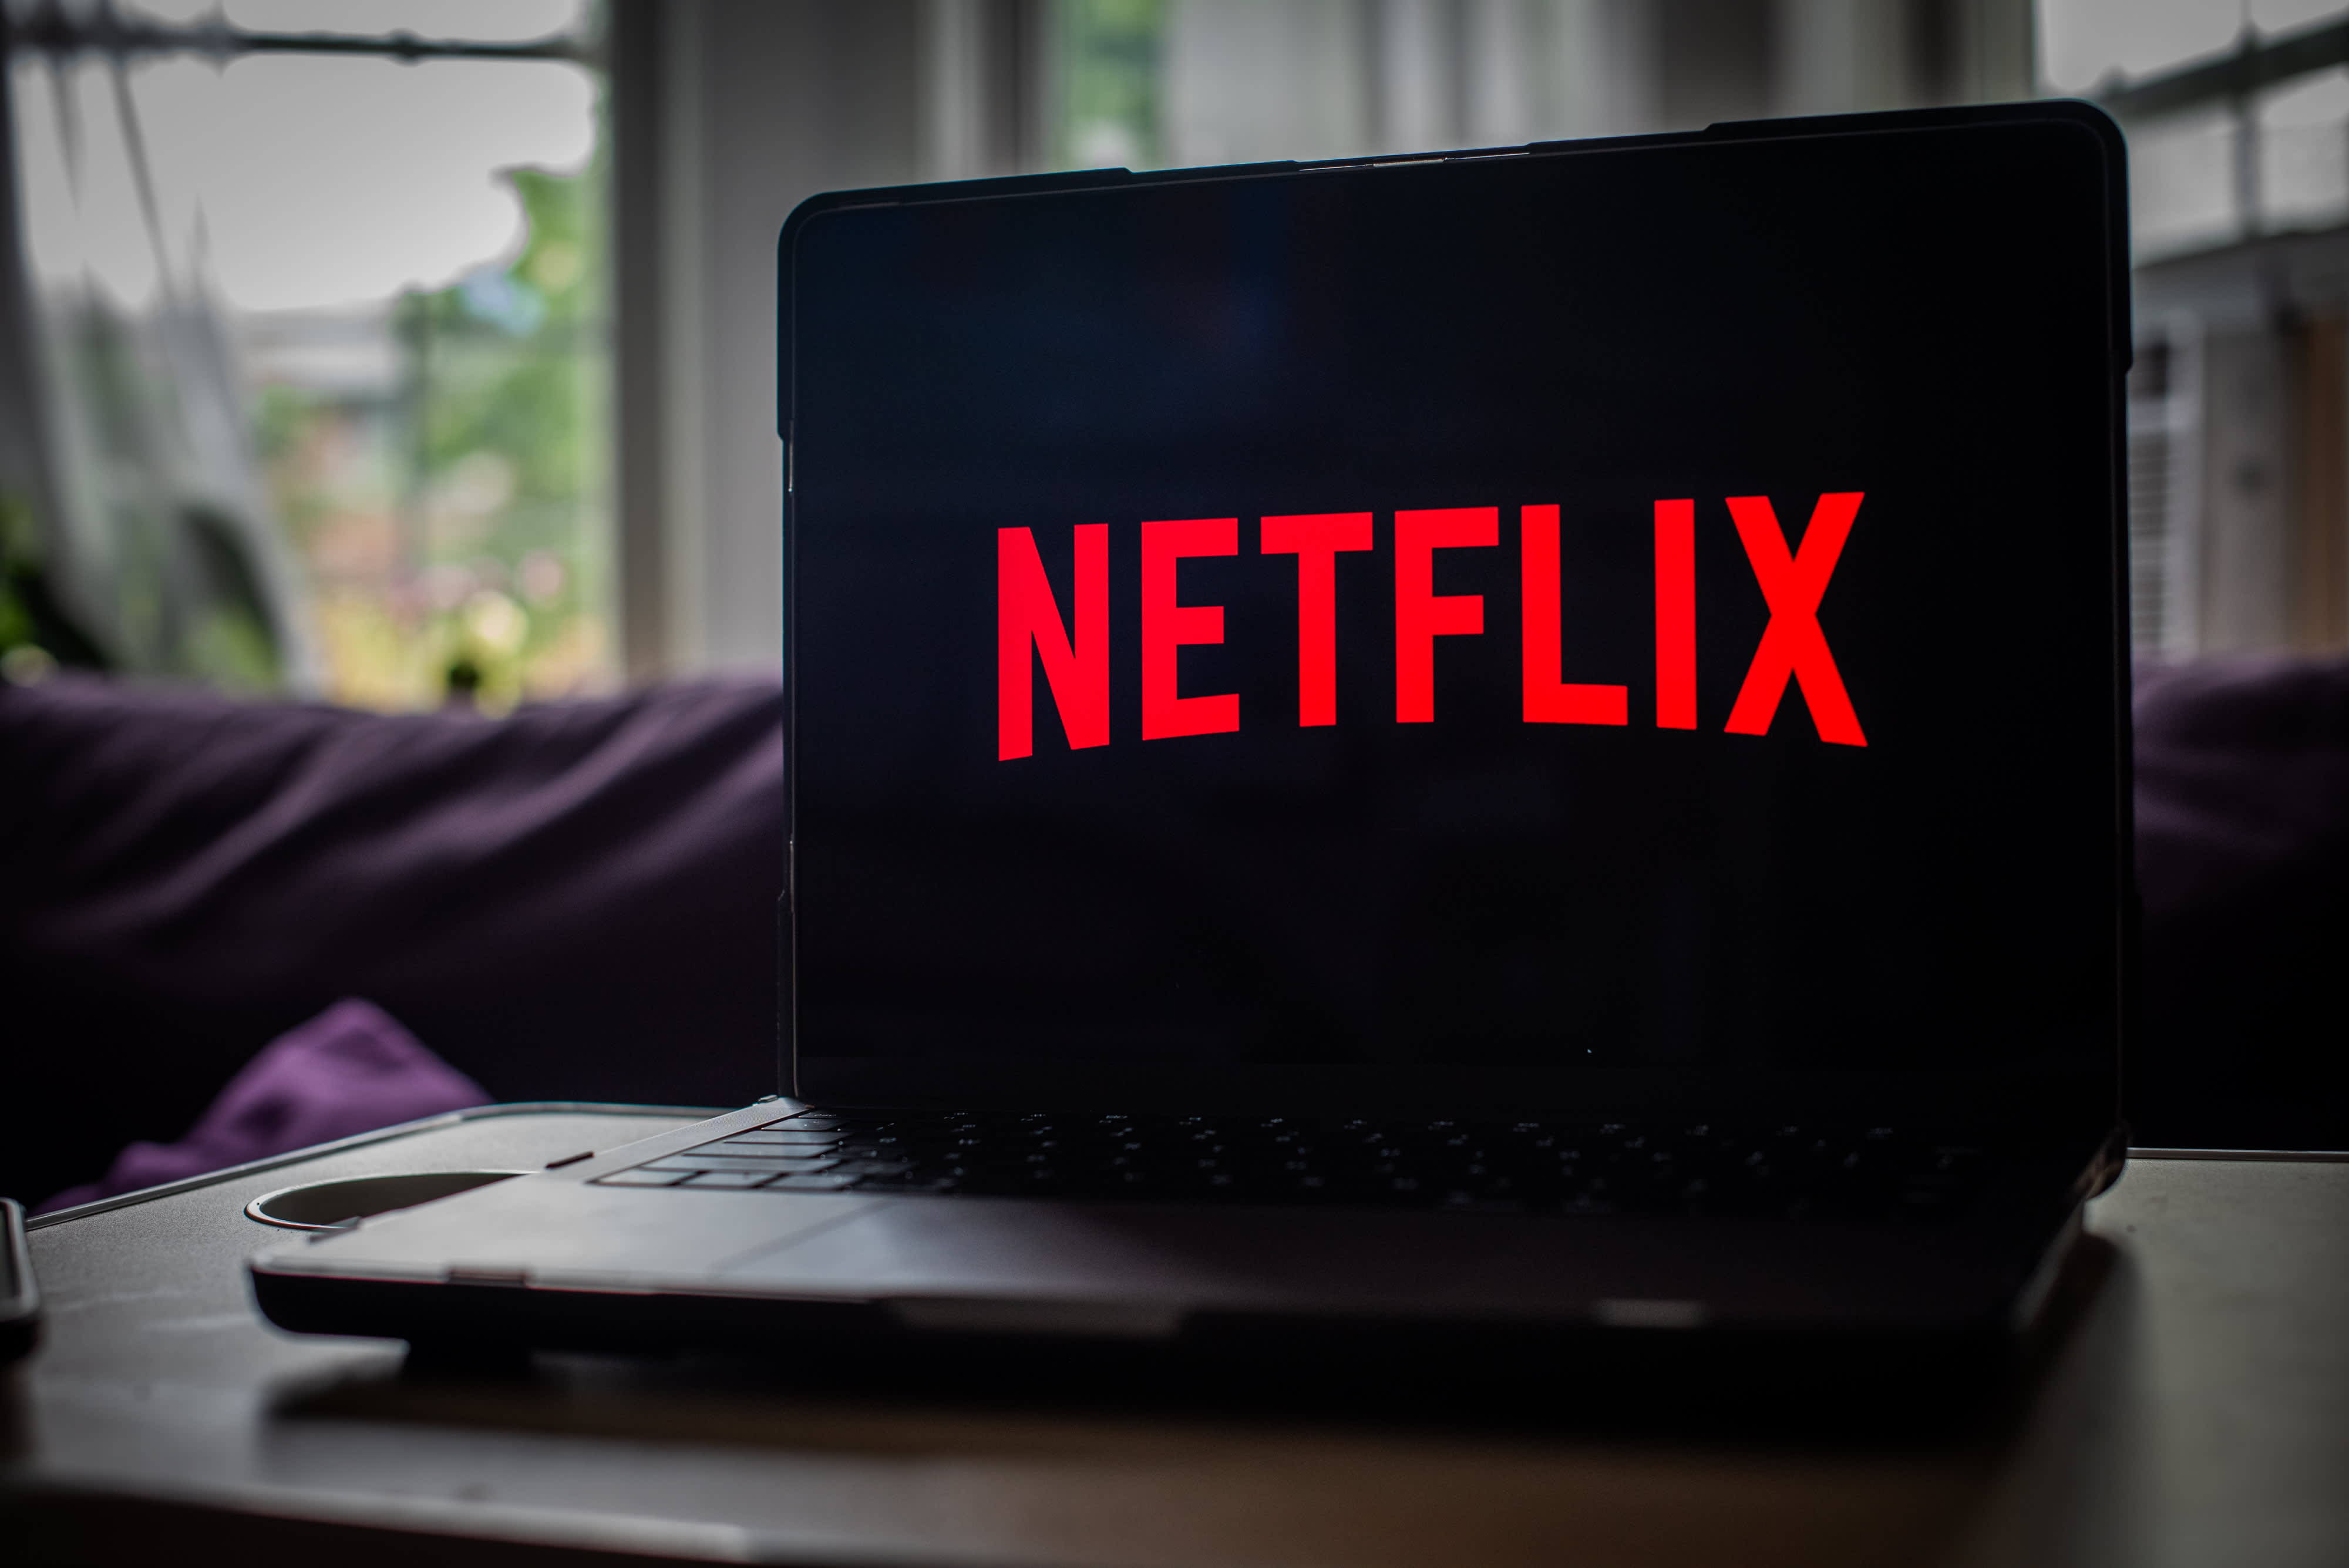 Analysts say Netflix investors should 'buy the pullback,' as password sharing 'supercharges' subscriber growth